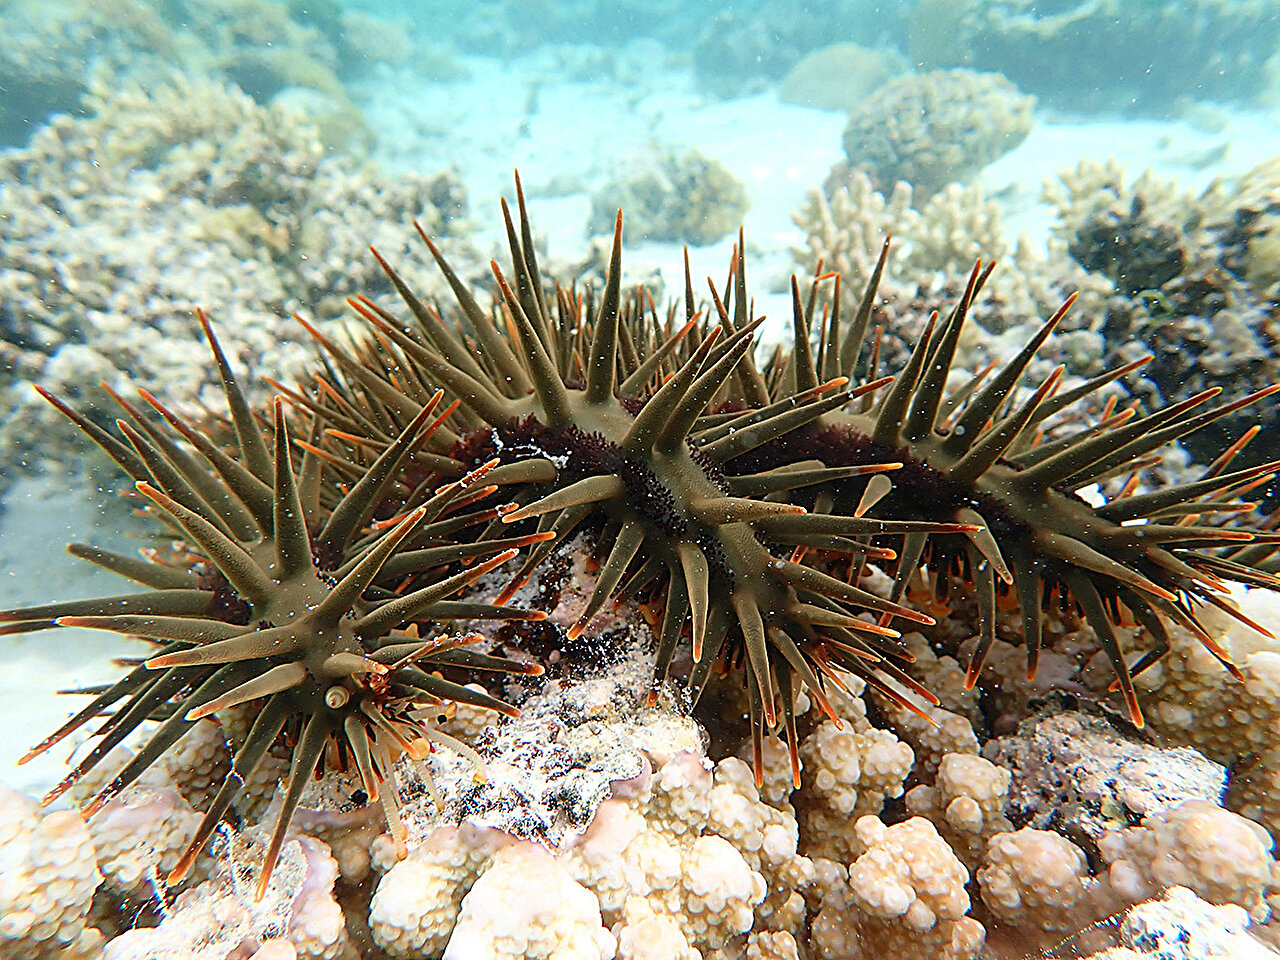 photo of Genetics provide key to fight crown-of-thorns starfish image